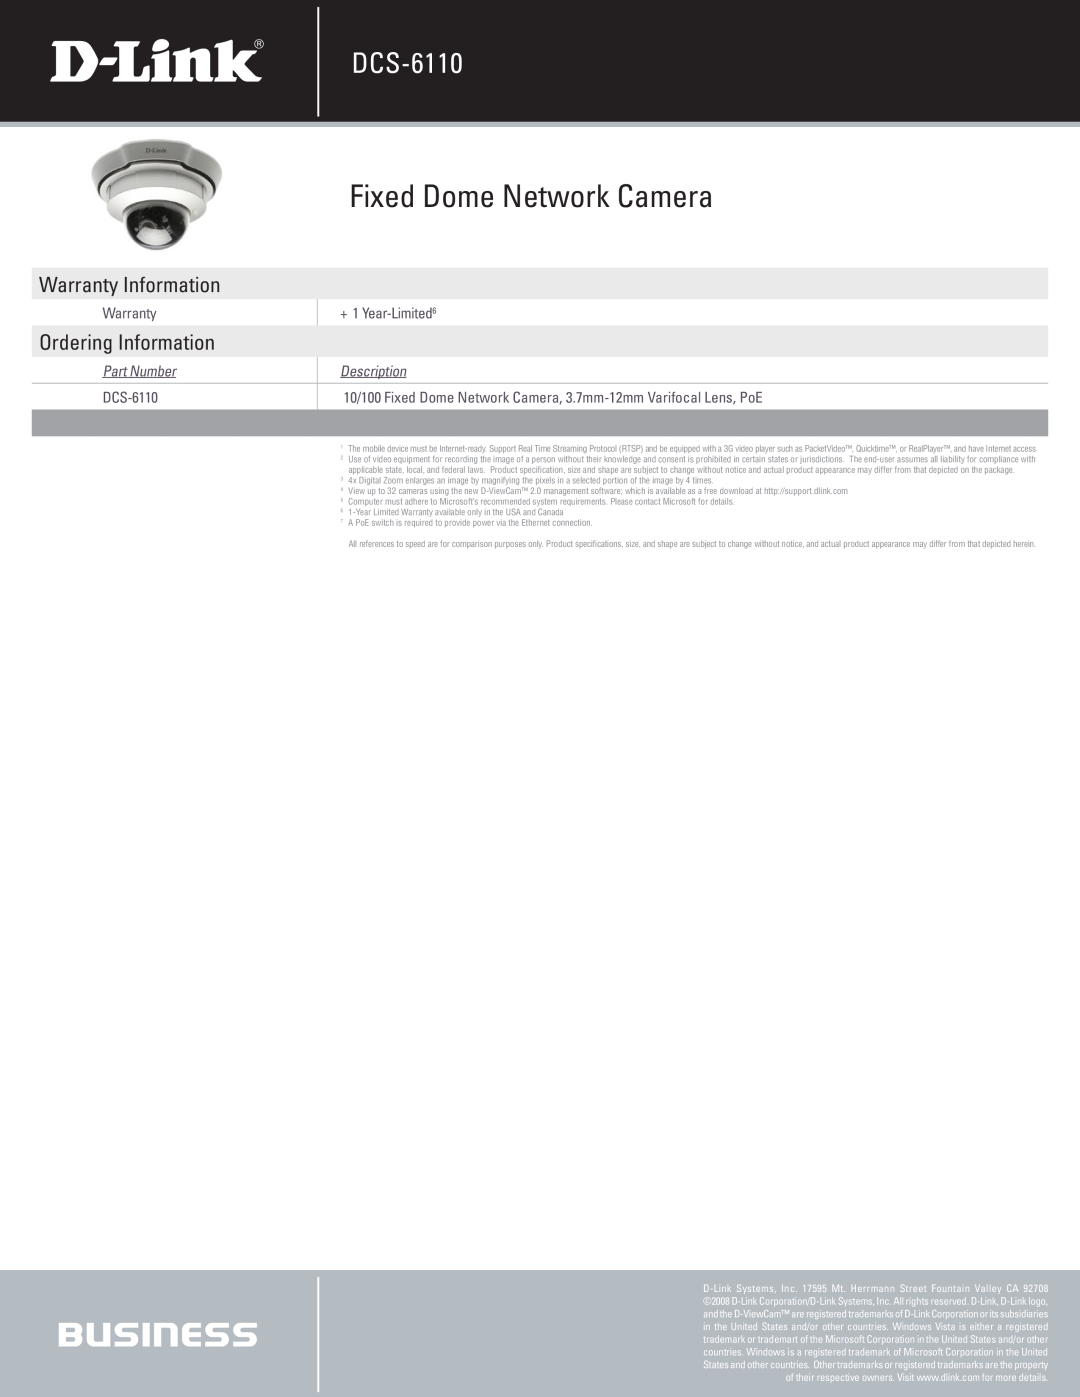 D-Link DCS-6110 manual Warranty Information, Ordering Information, Fixed Dome Network Camera, Part Number, Description 